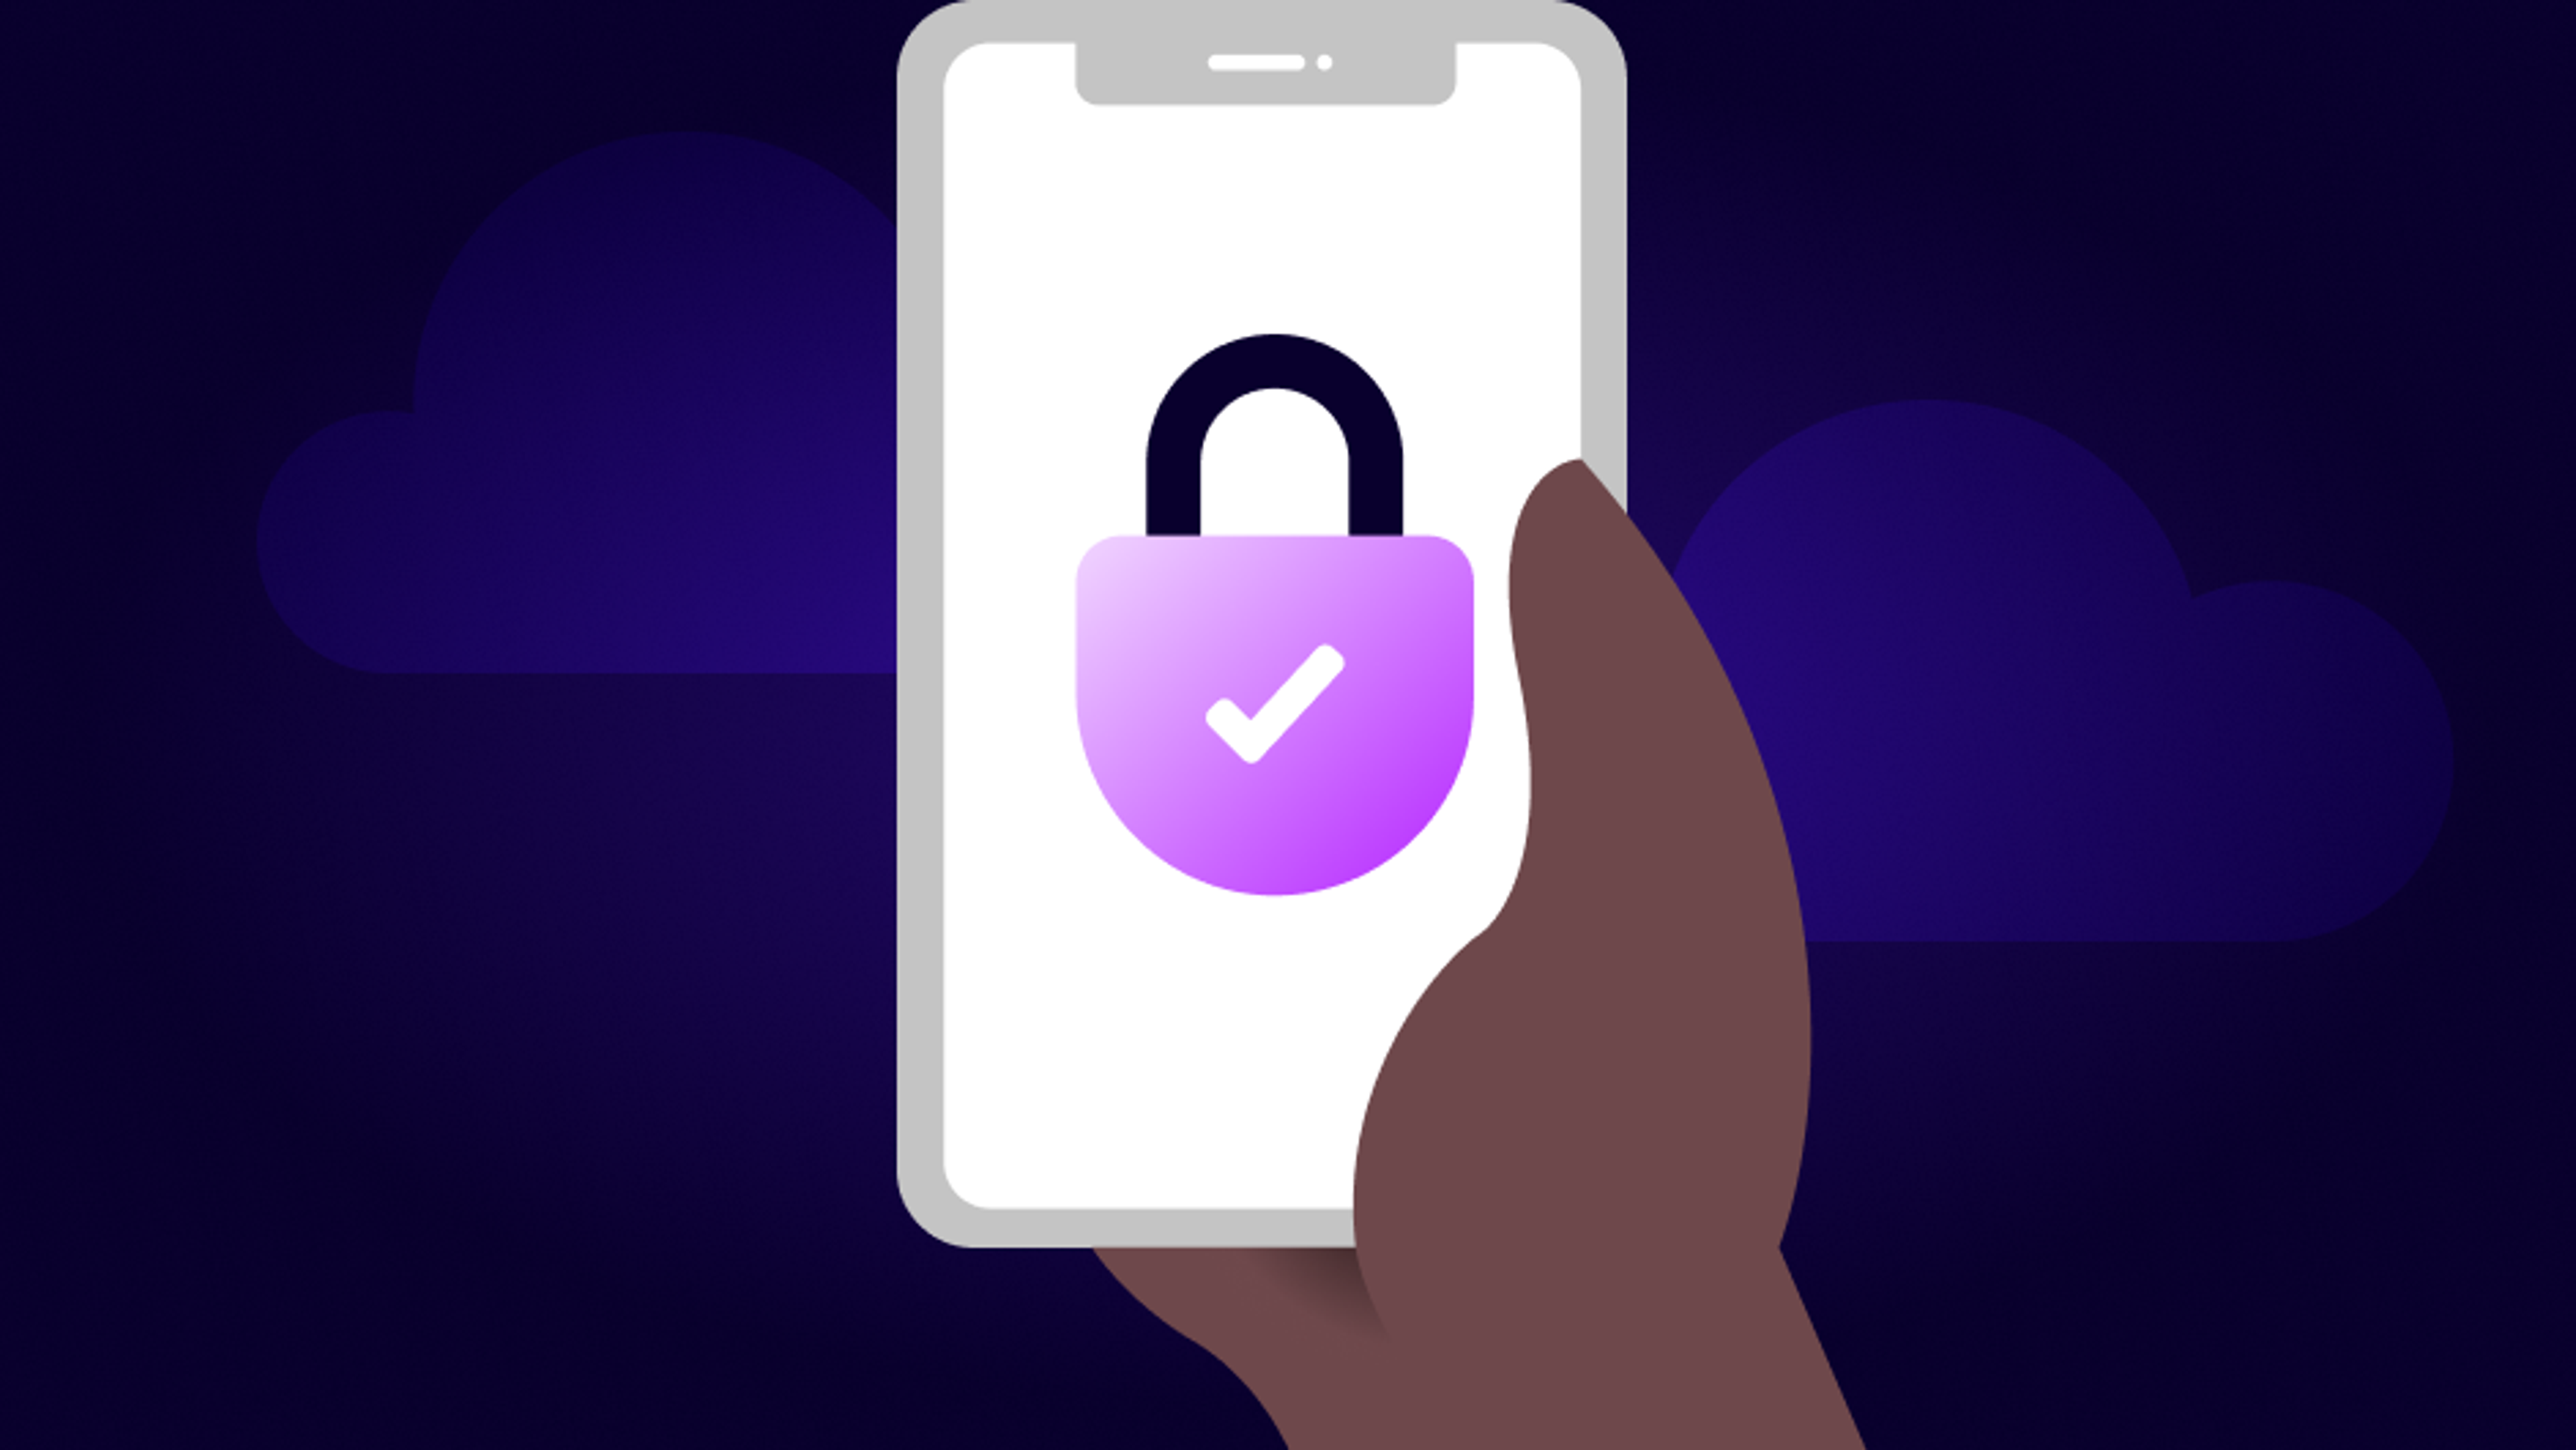 Zego illustrated hand holding a phone with a secure padlock symbol